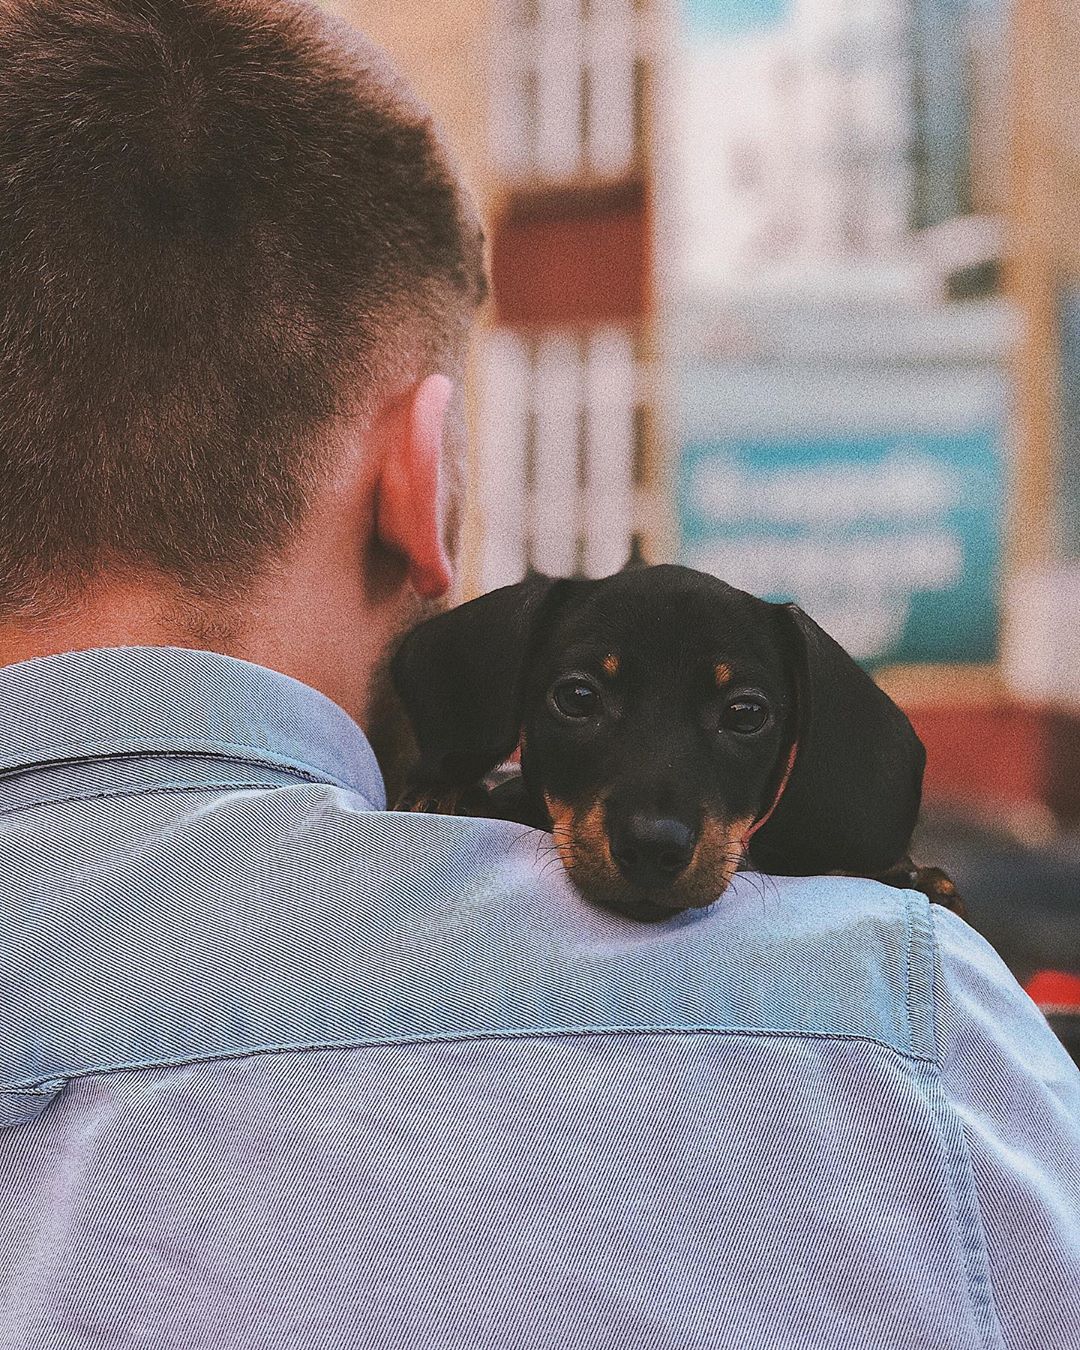 adorable Dachshund face resting in its owner's shoulder